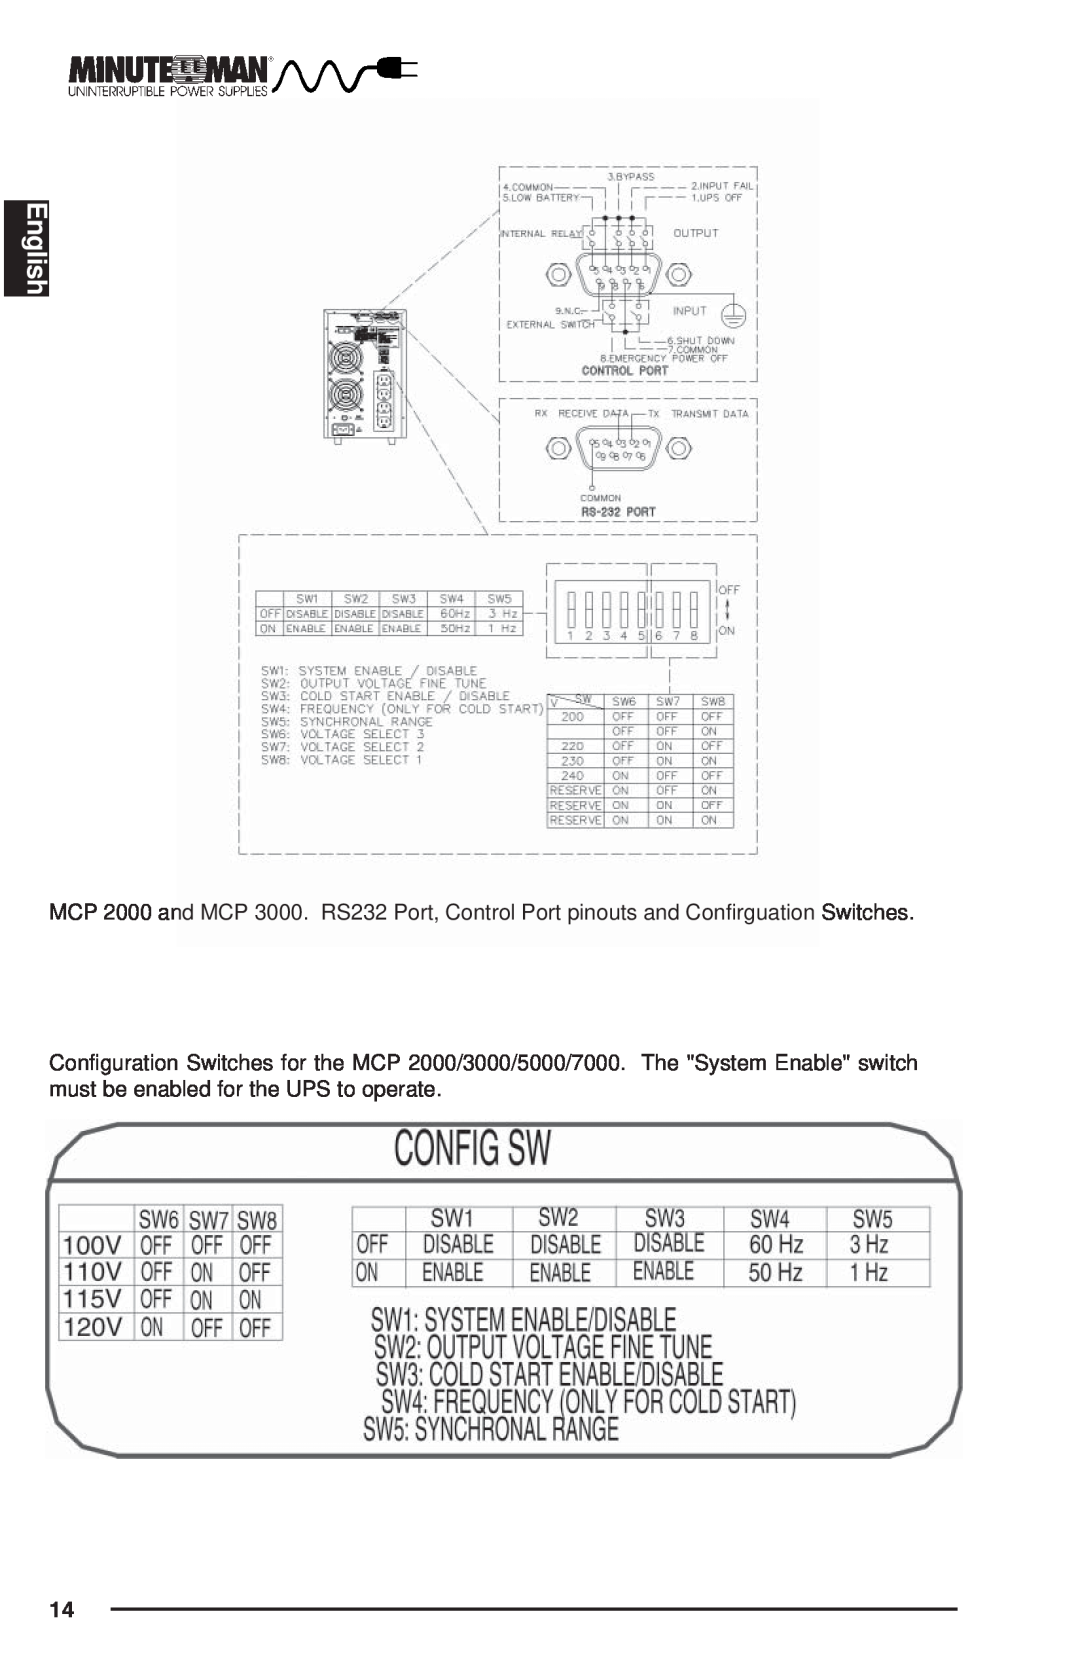 Minuteman UPS MCP-E user manual English, MCP 2000 and MCP 3000. RS232 Port, Control Port pinouts and Confirguation Switches 